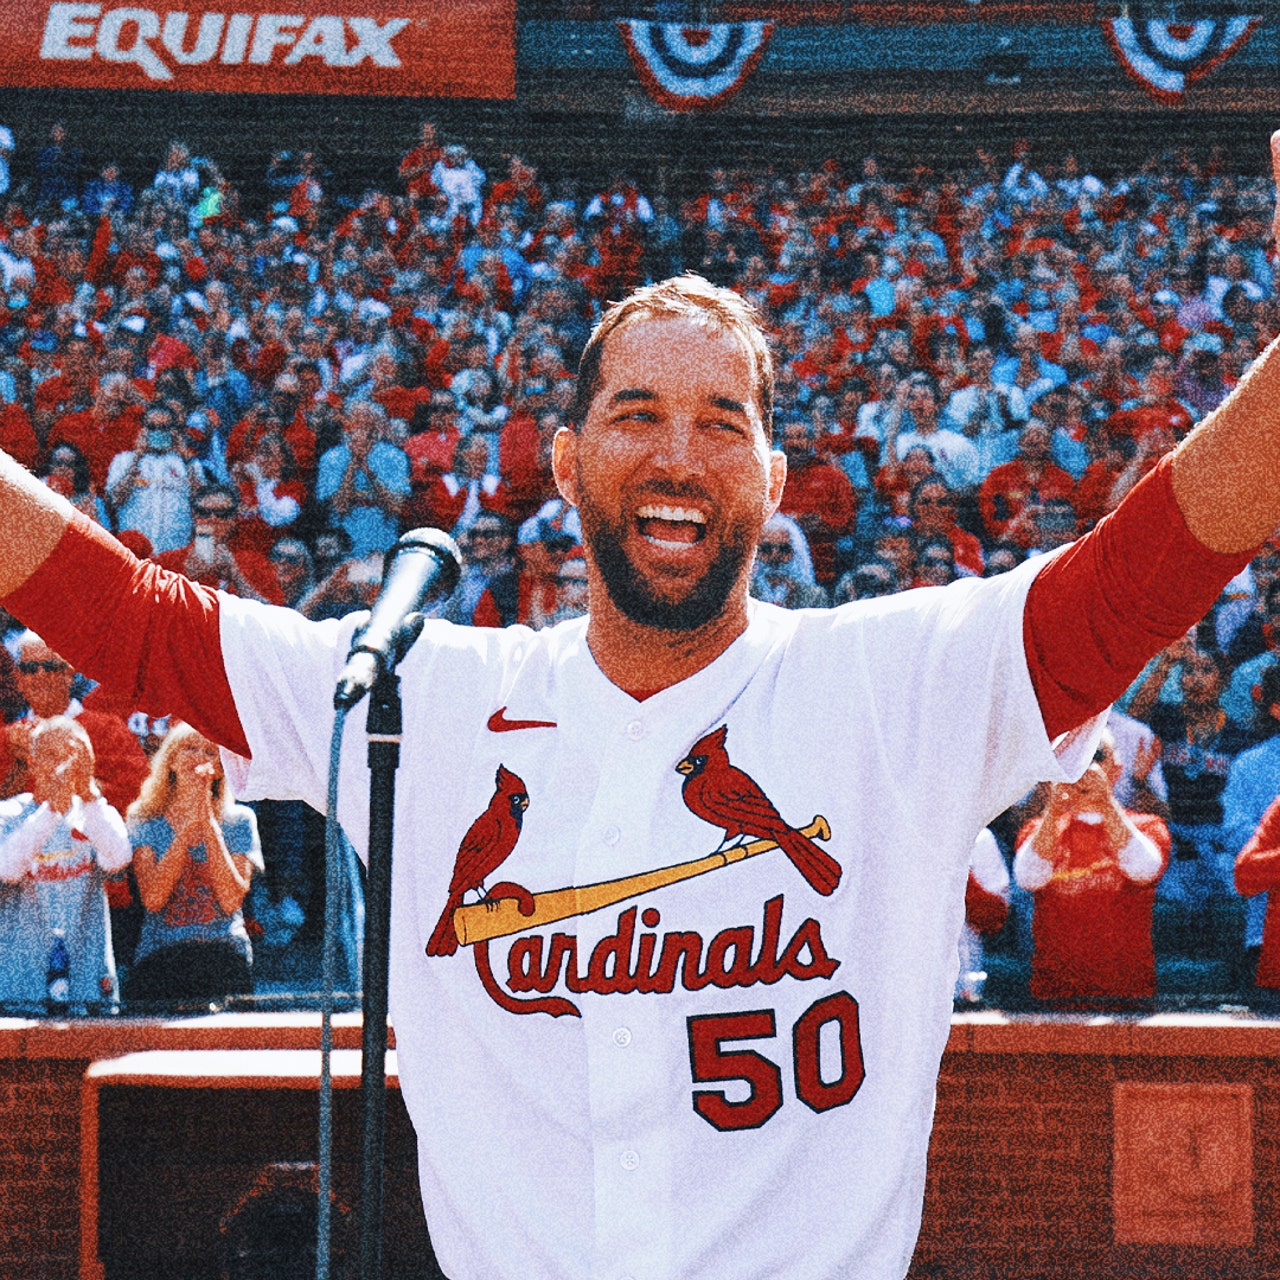 Adam Wainwright to perform postgame concert after last Cardinals